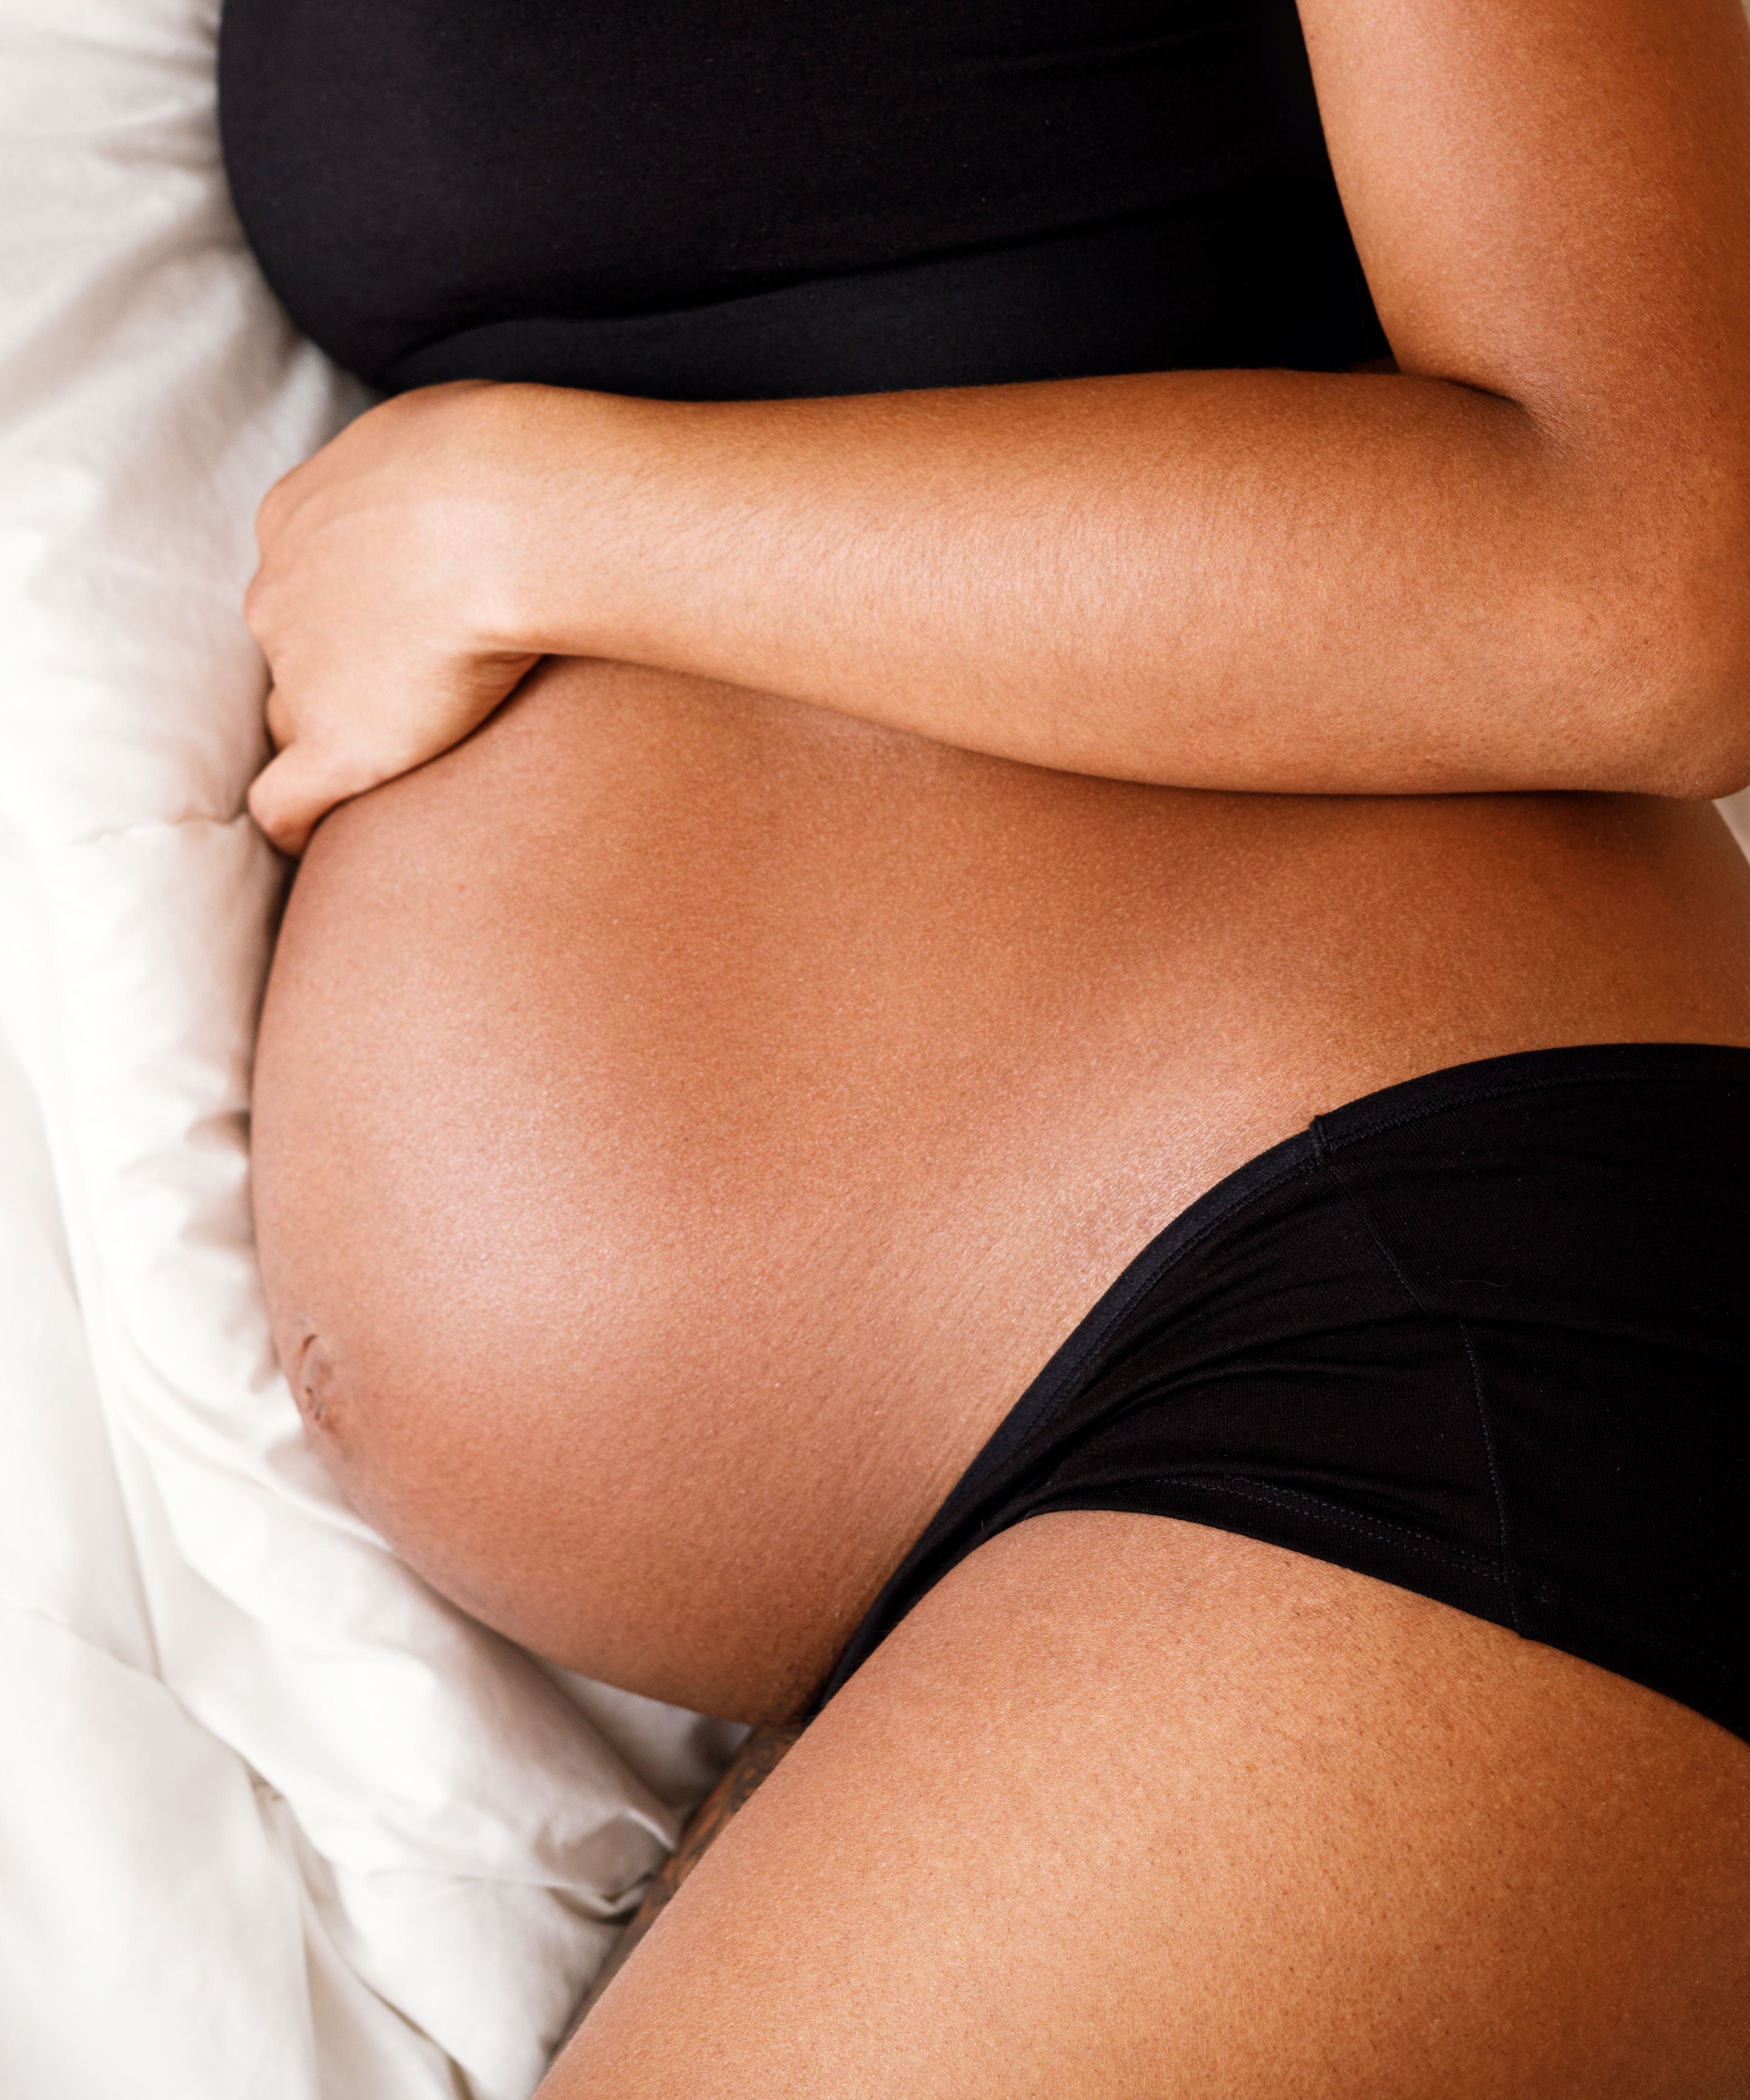 Coronavirus Makes Being Black And Pregnant Scarier